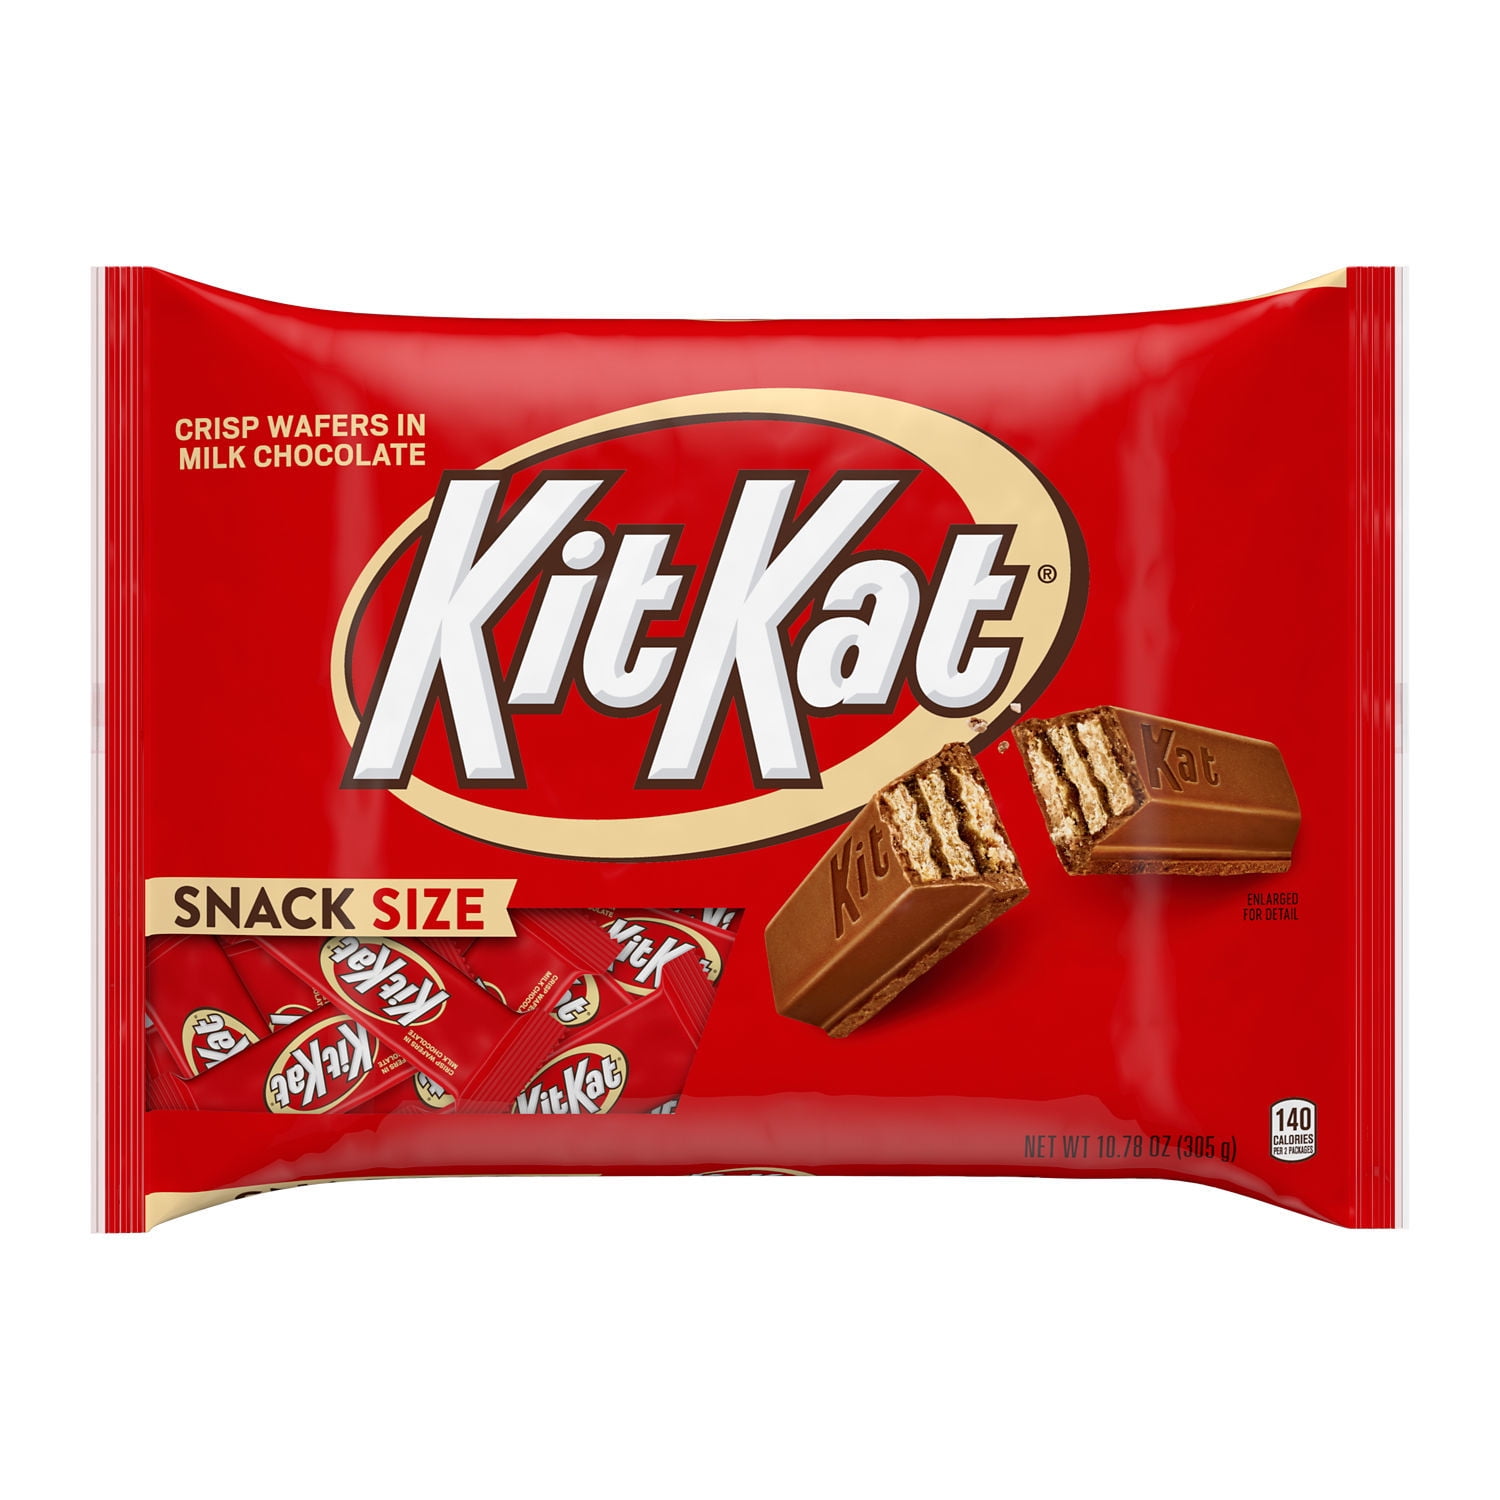 Is Kitkat a candy?